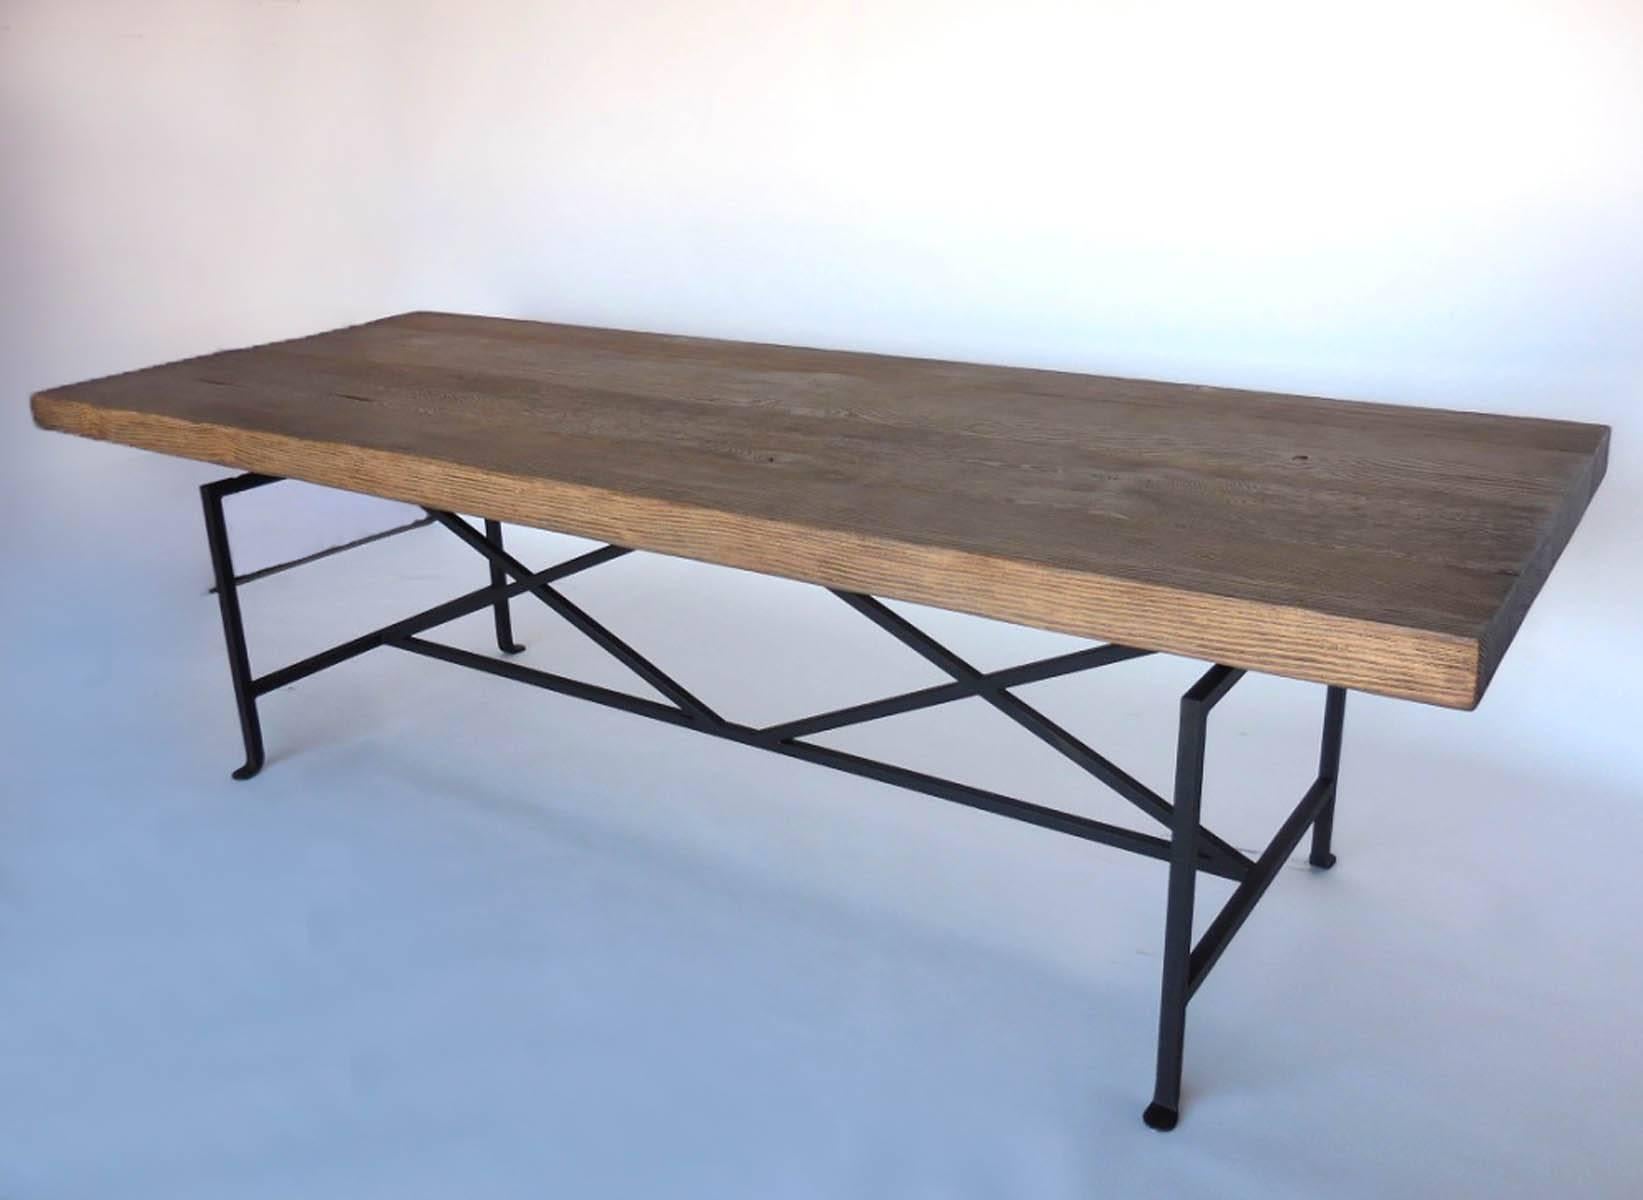 3 inch thick reclaimed wood planks make up the top of this rustic yet modern table. Can be made in any size and in a variety of finishes. As shown in our #6 finish. Natural distress of old wood, knots and old cracks, yet smooth to the